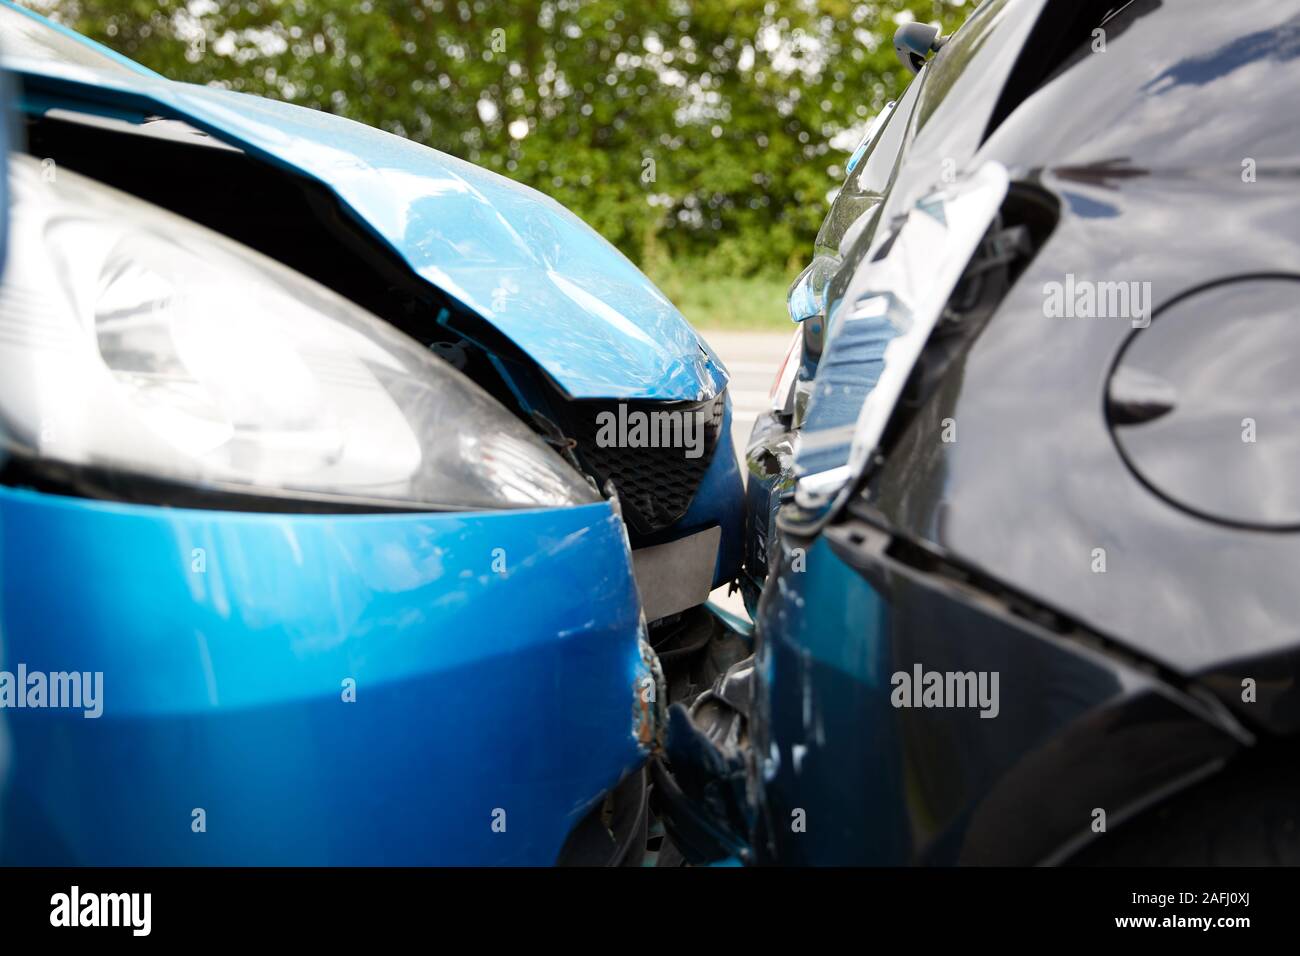 Close Up Of Two Cars Damaged In Road Traffic Accident Stock Photo